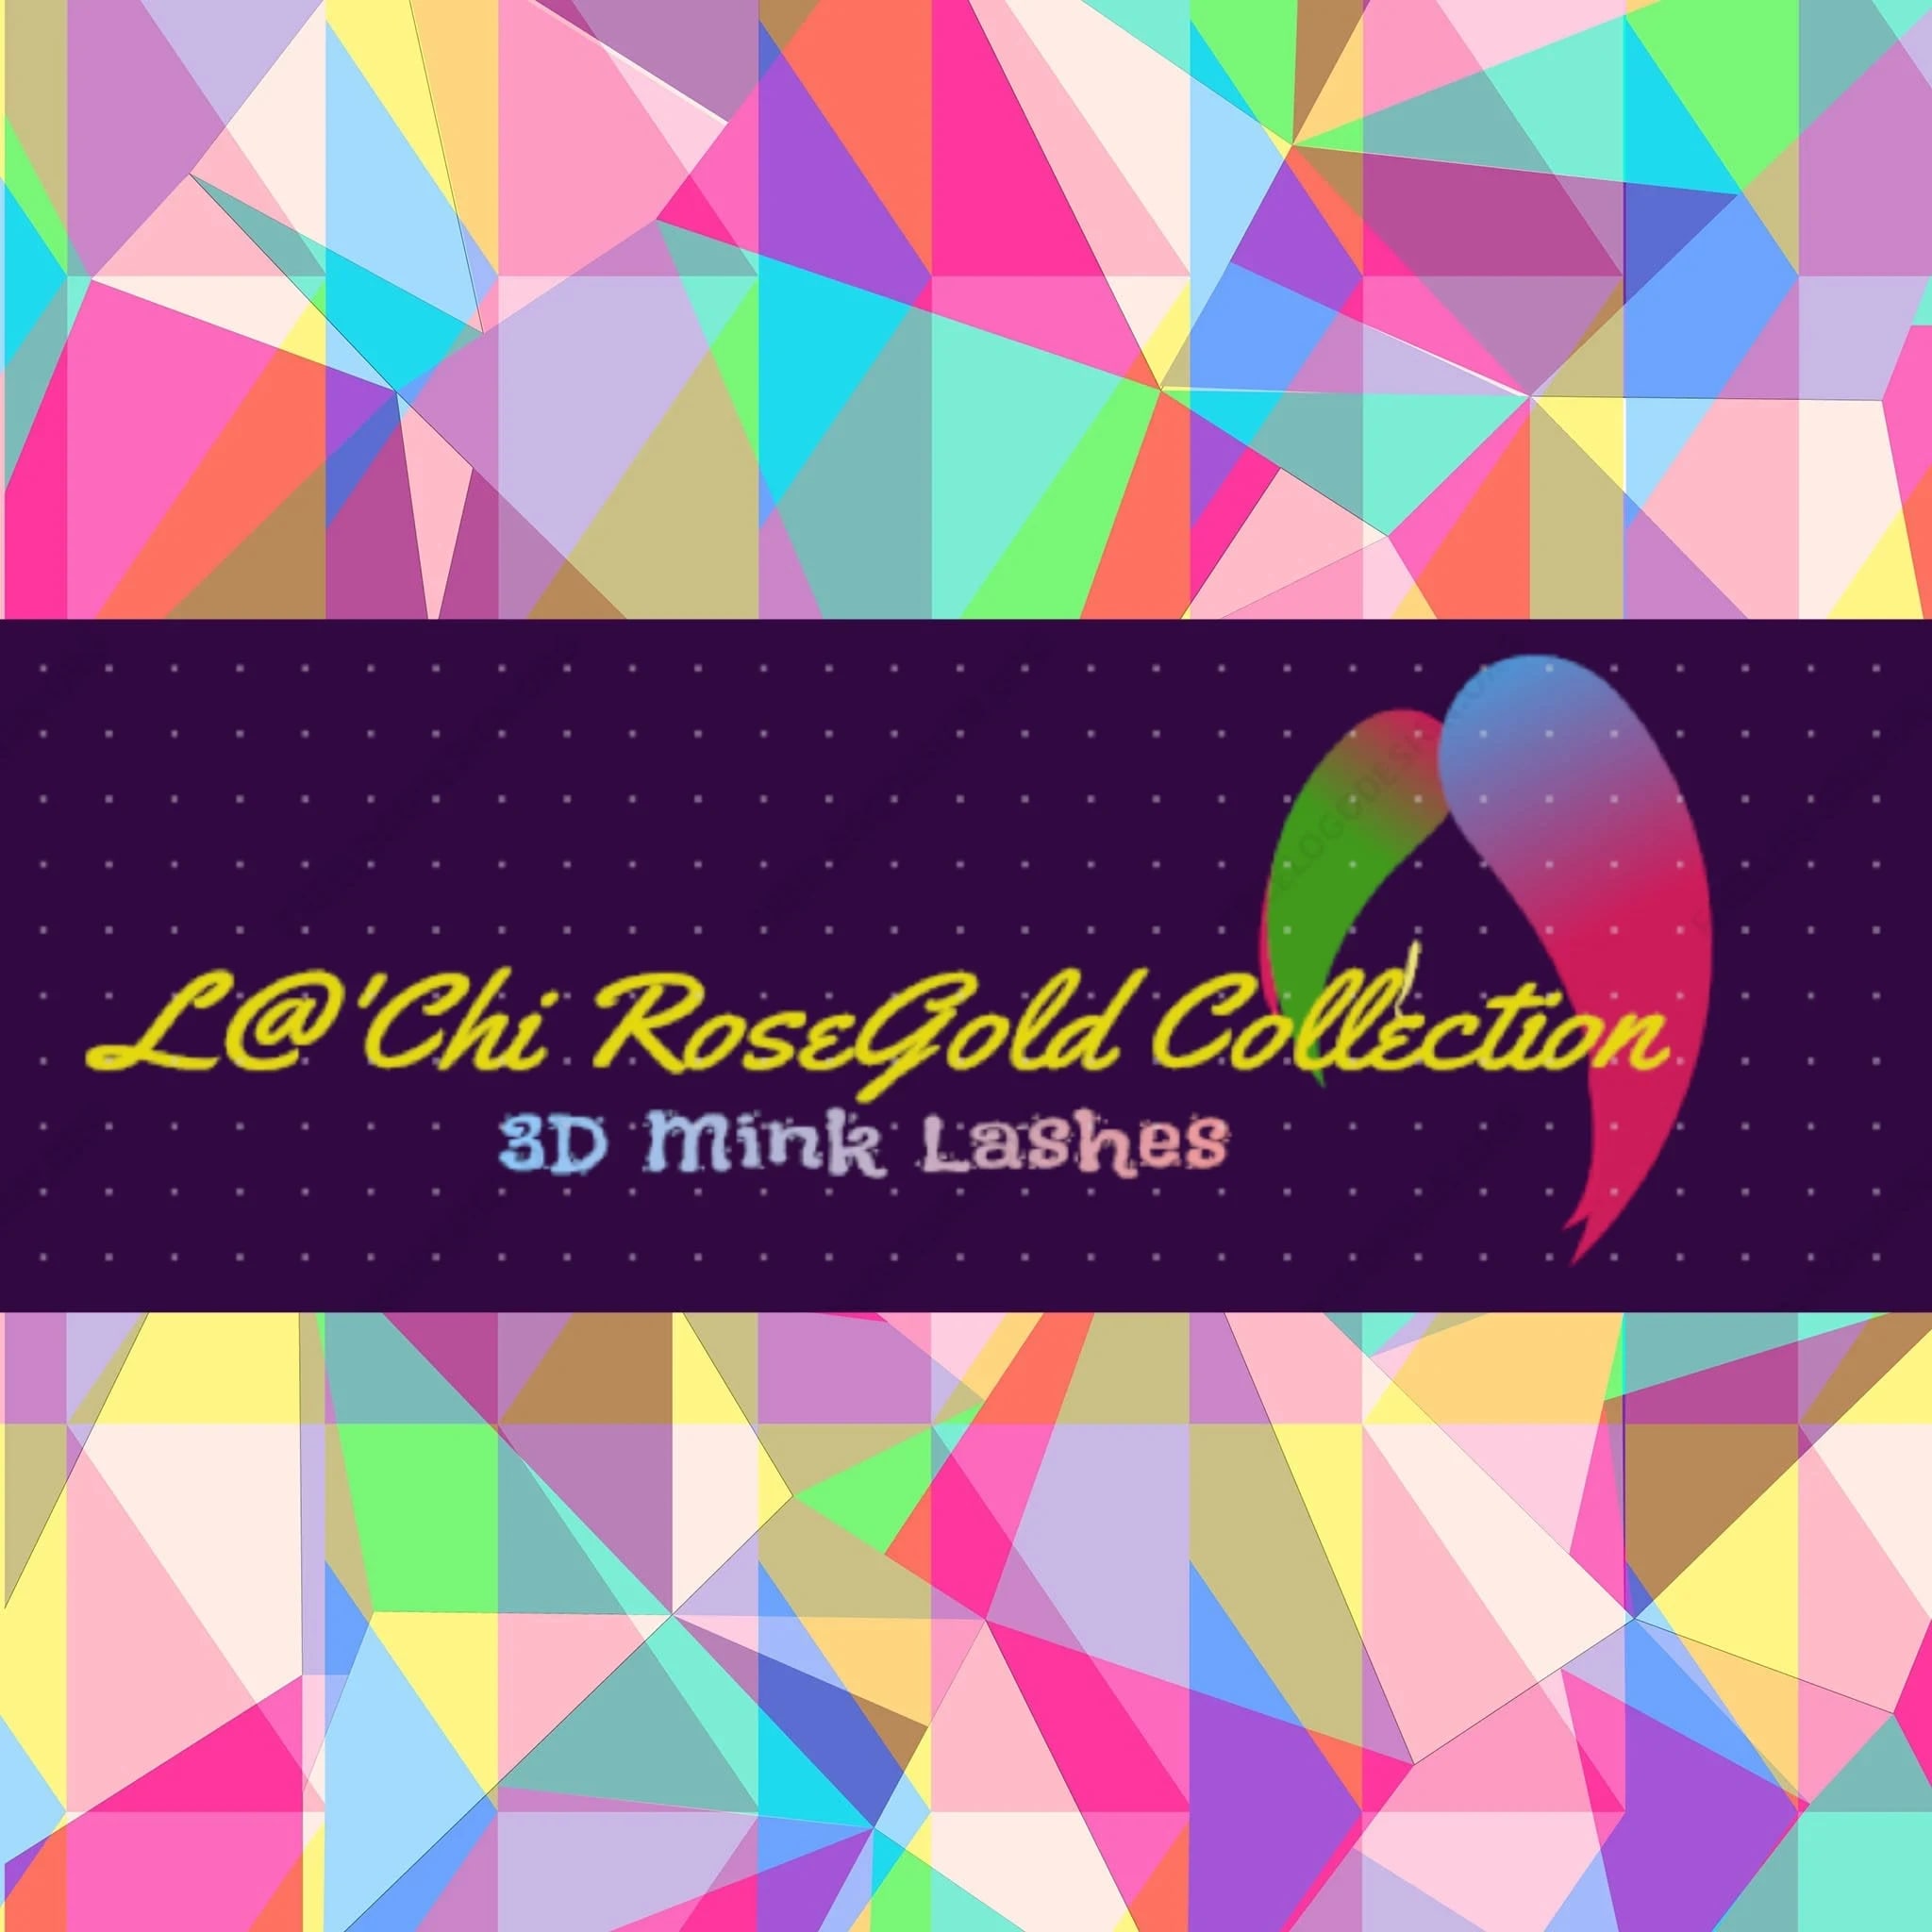 La'Chi RoseGold Collections